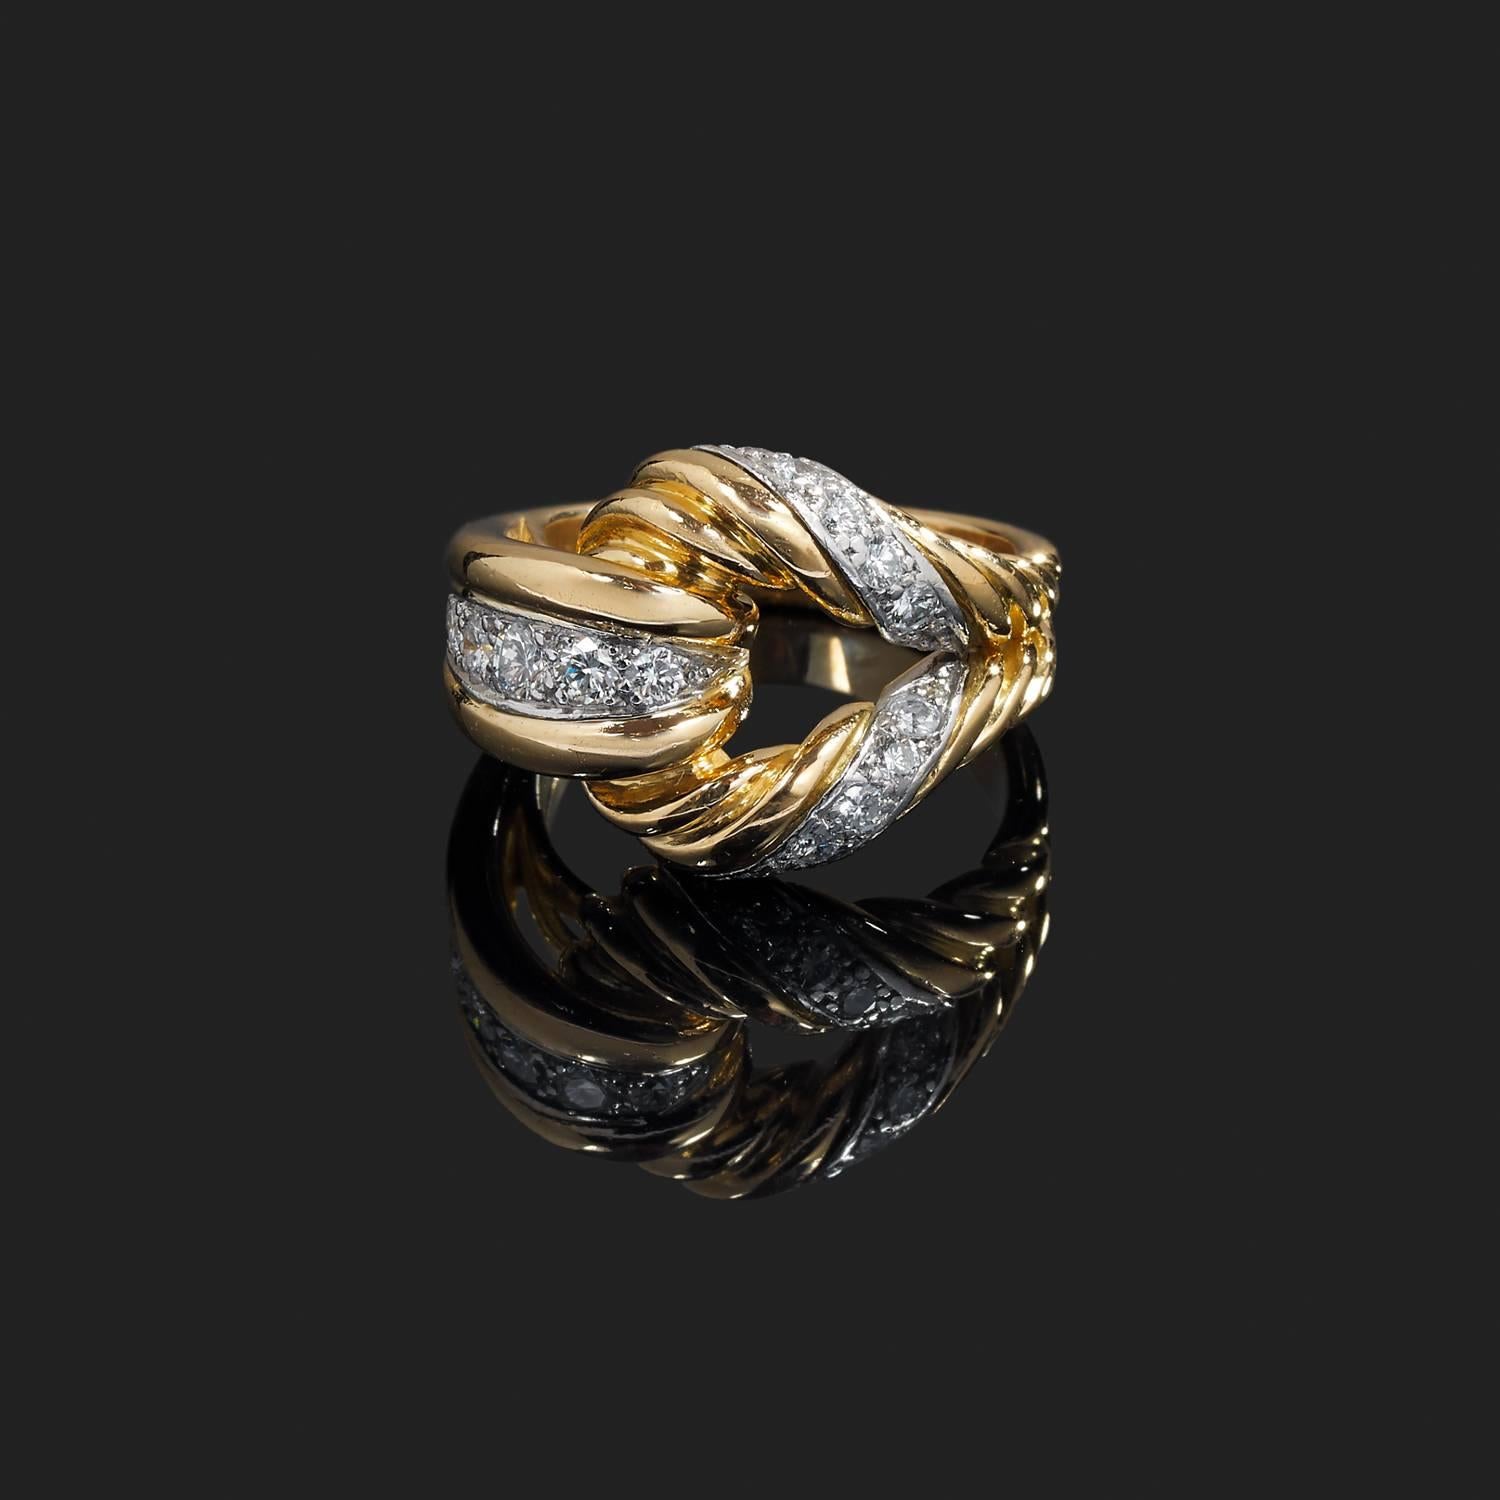 A Diamonds and 18k Ring, Decorated and Designed with a Buckle, Setting with Diamonds - Circa 1900 - Mauboussin